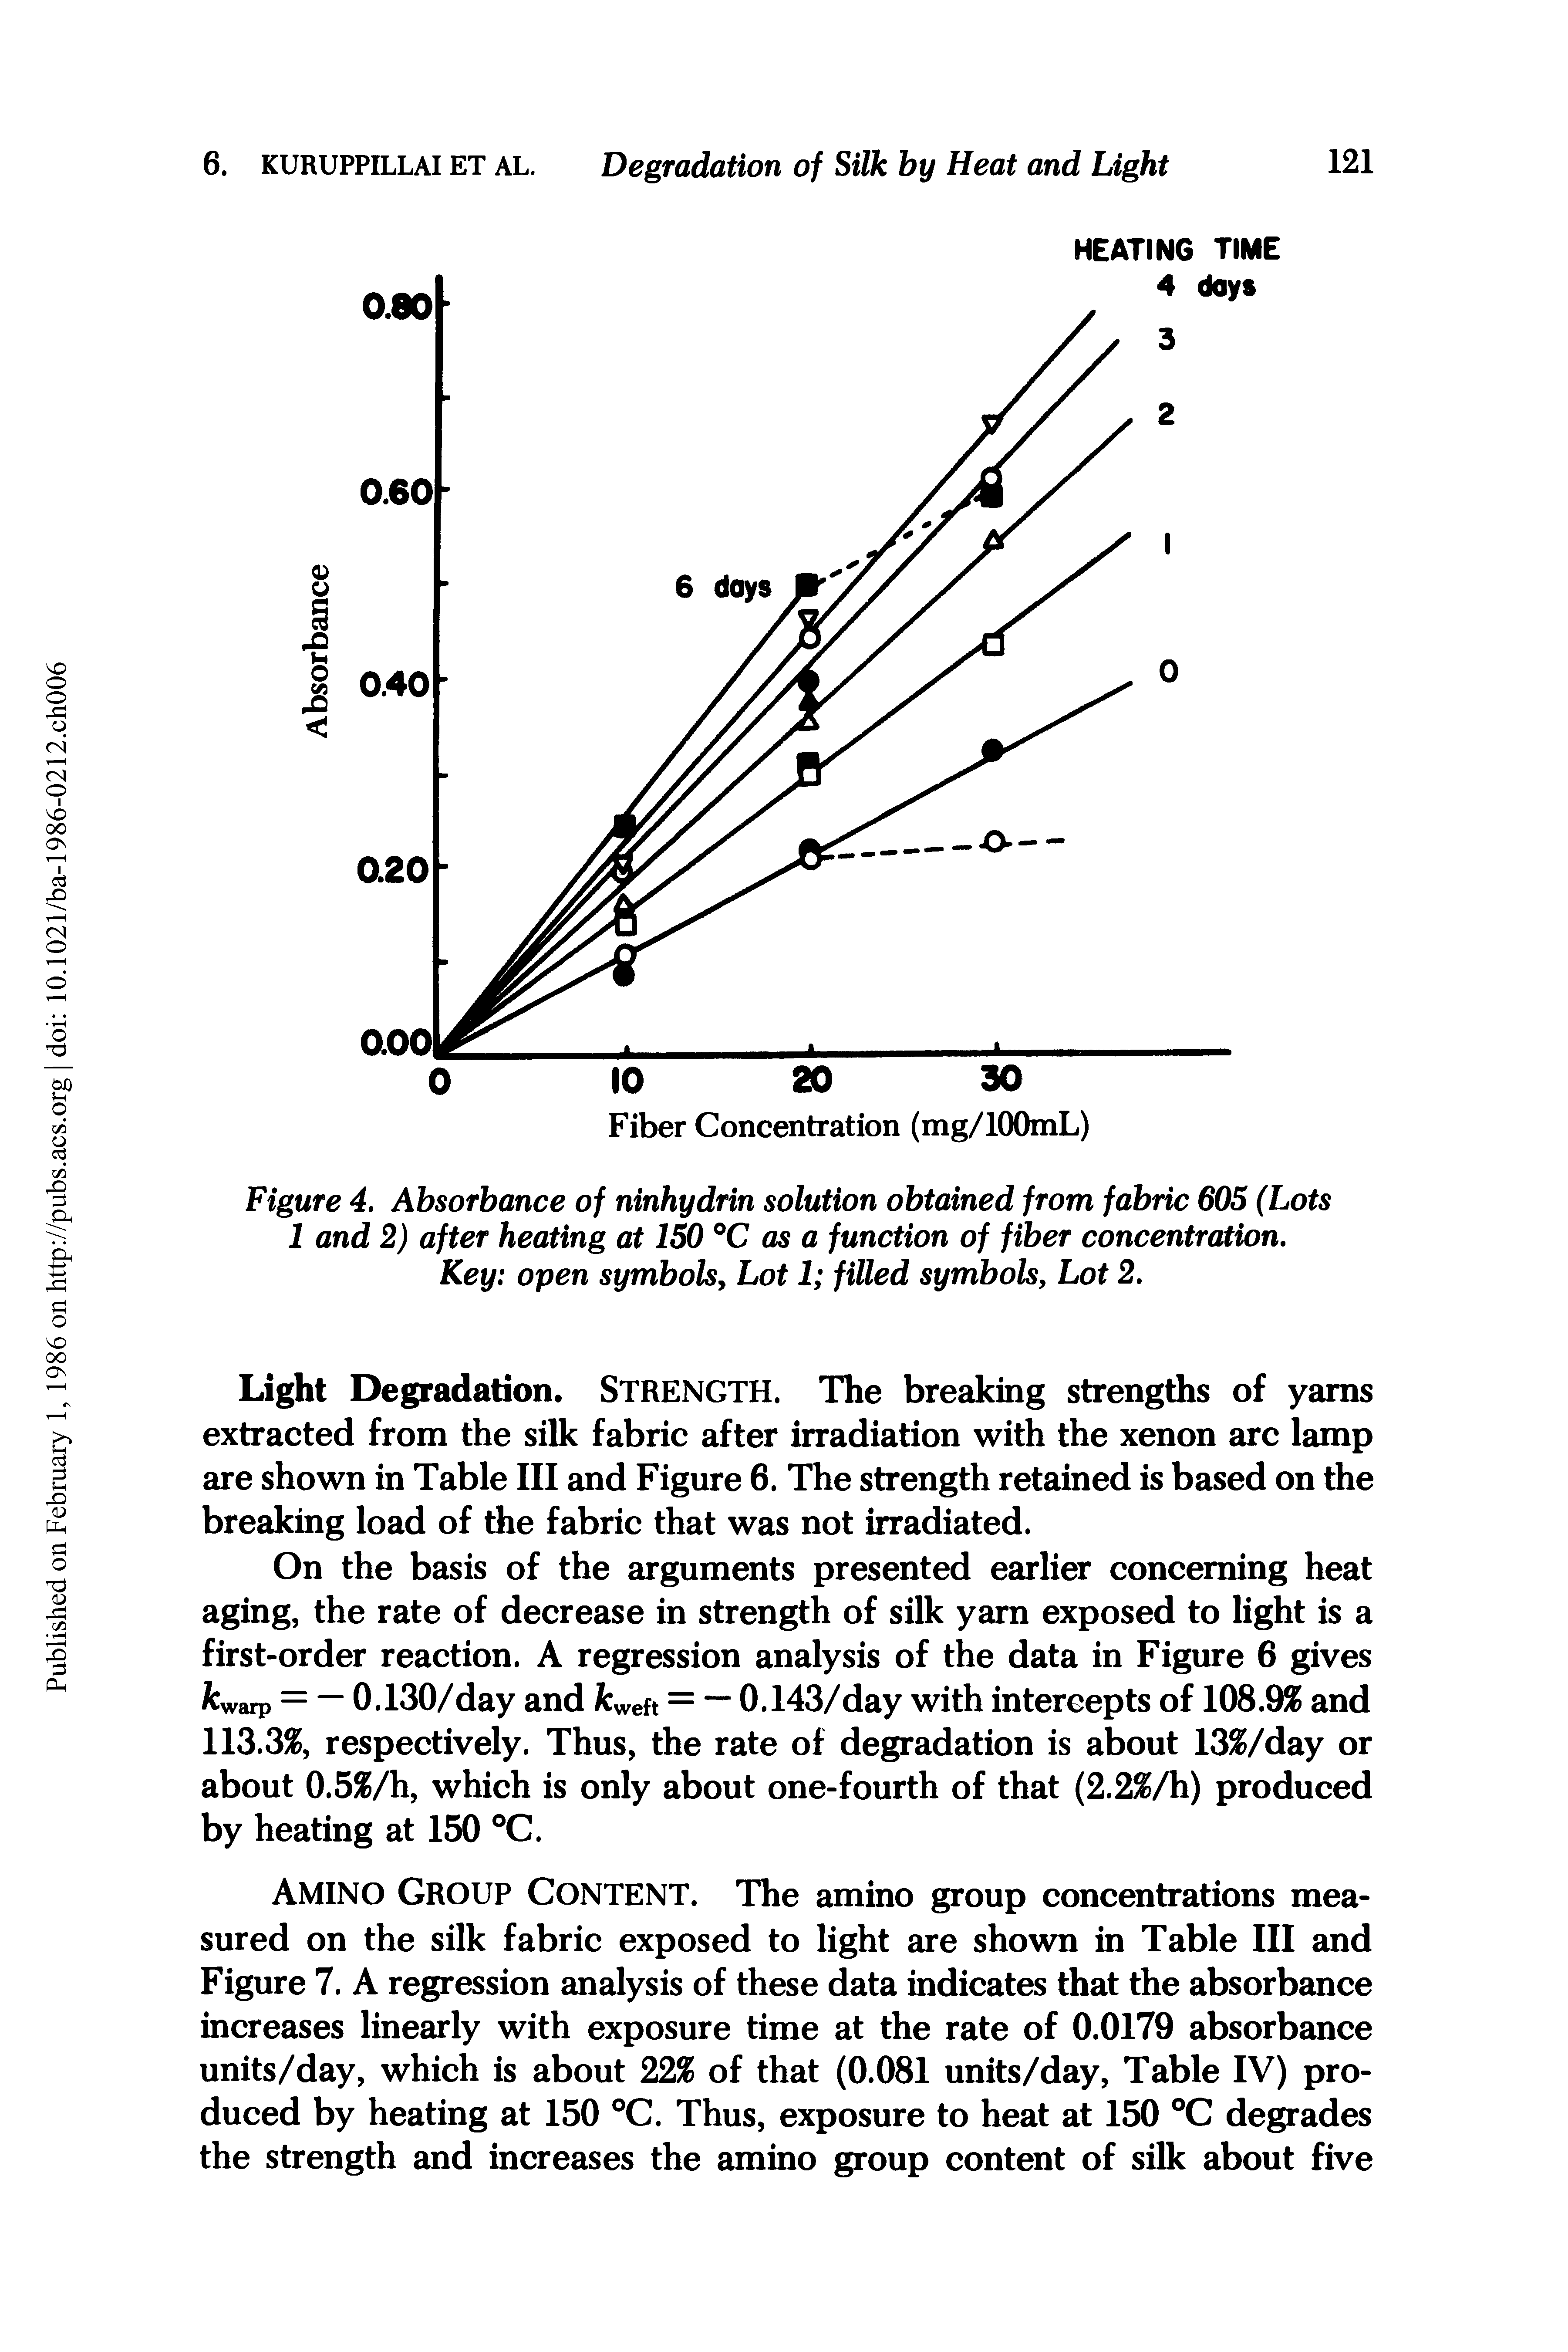 Figure 4. Absorbance of ninhydrin solution obtained from fabric 605 (Lots 1 and 2) after heating at 150 °C as a function of fiber concentration. Key open symbols, Lot 1 filled symbols, Lot 2.